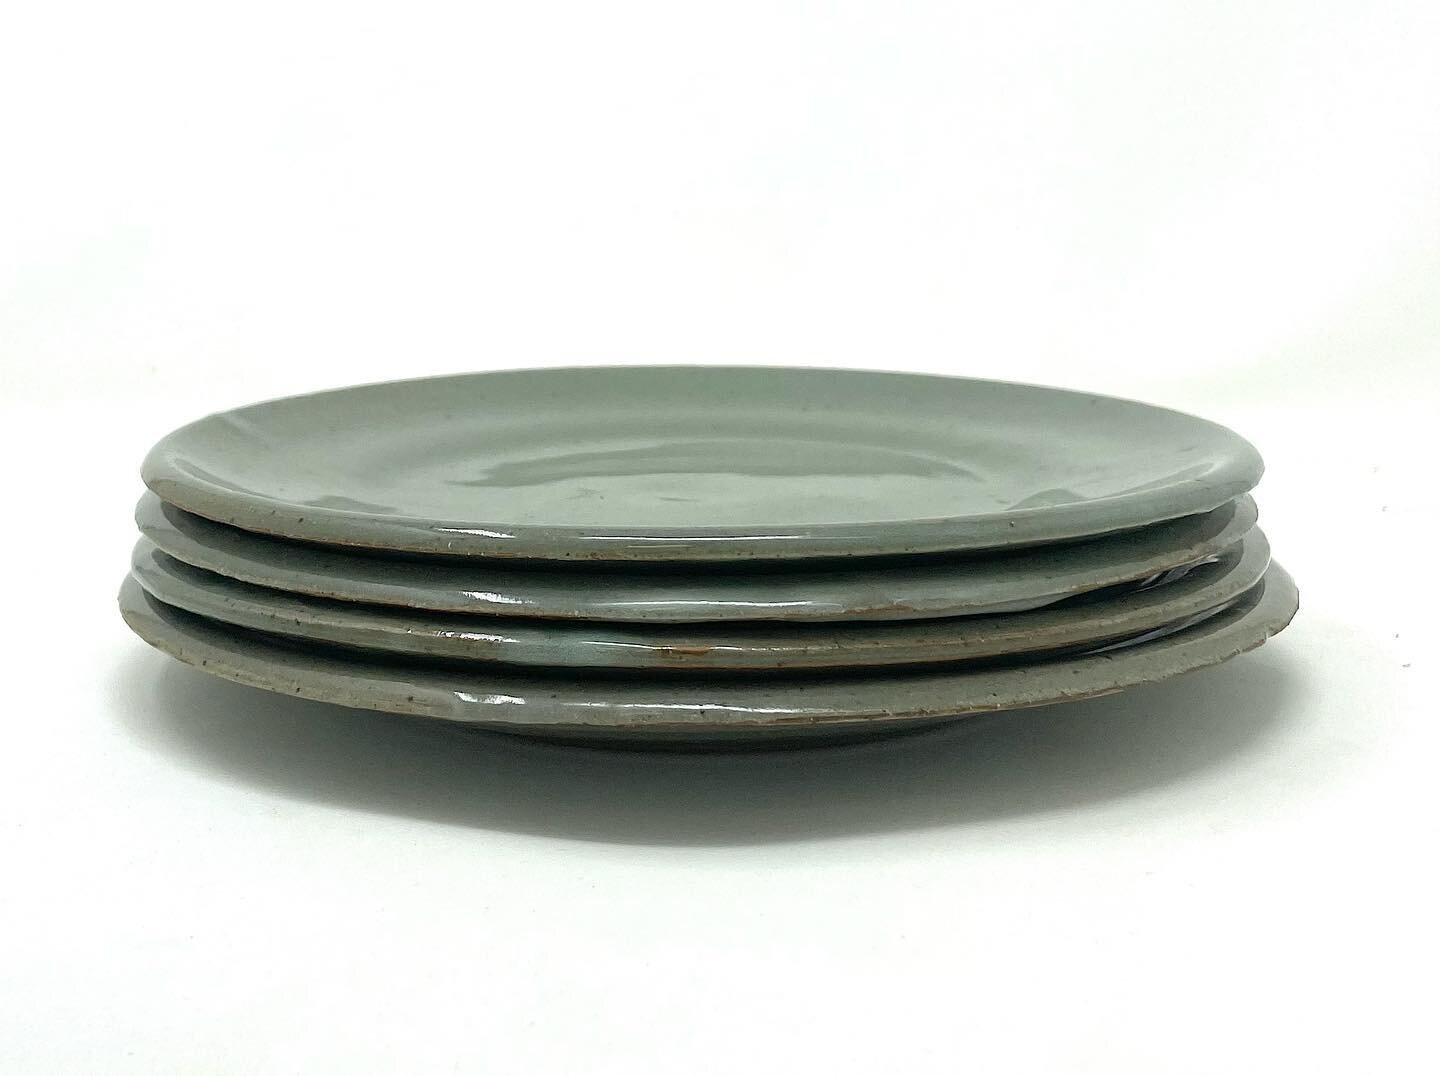 Set of salad plates, fired in cone 10 reduction with a celadon glaze. 
@claystreetstudiospdx